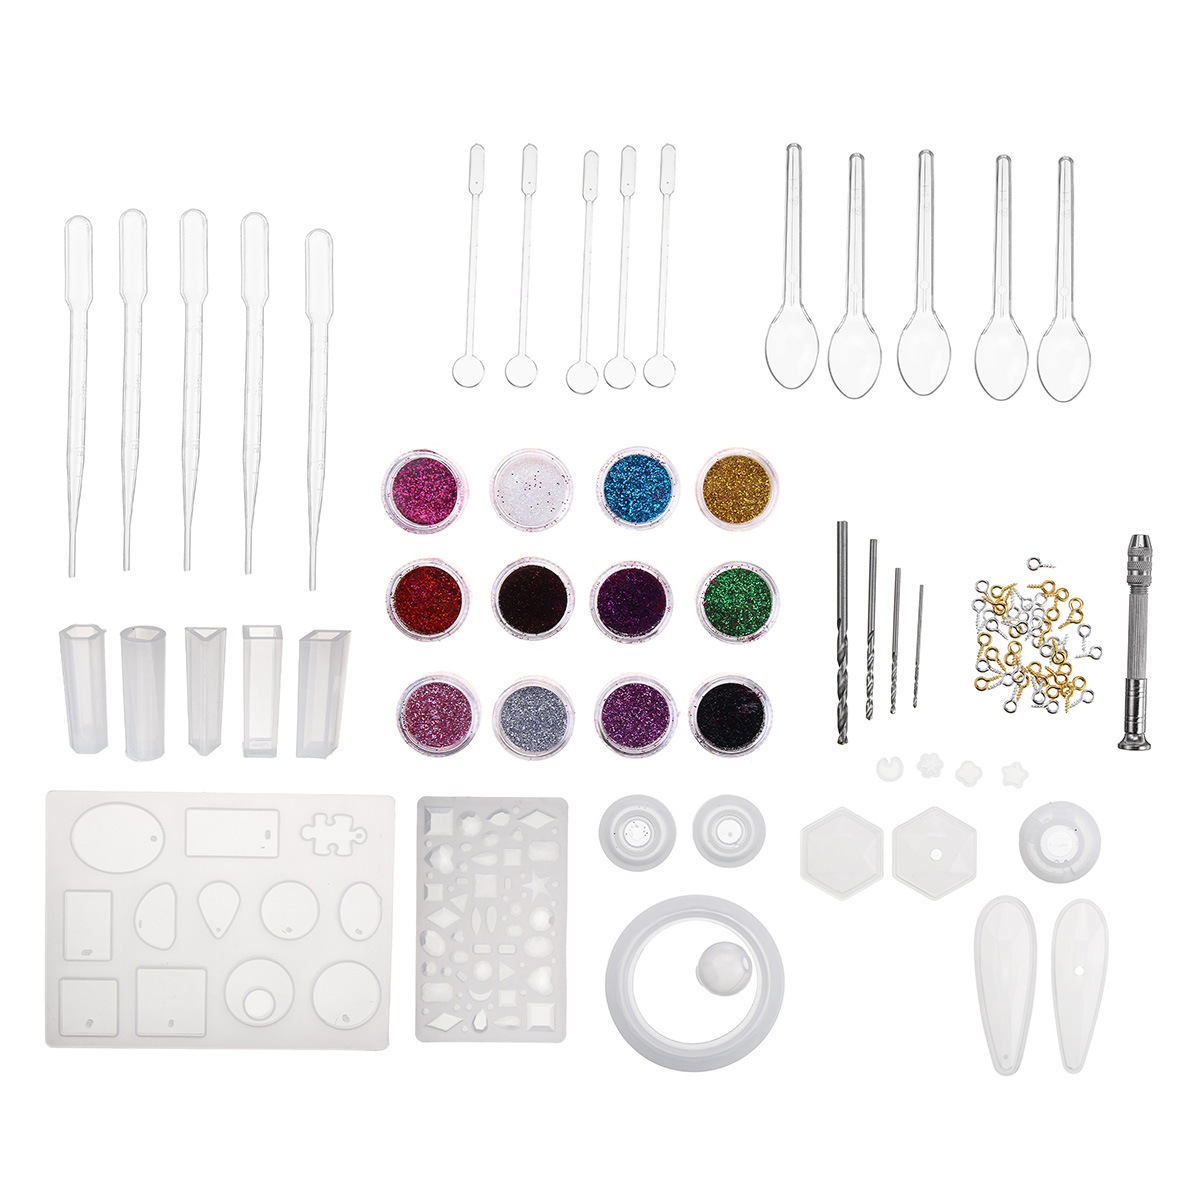 98Pcs-DIY-Silicone-Pendant-Mold-Jewelry-Making-Cube-Resin-Casting-Molds-Craft-Tools-Kit-1517942-1